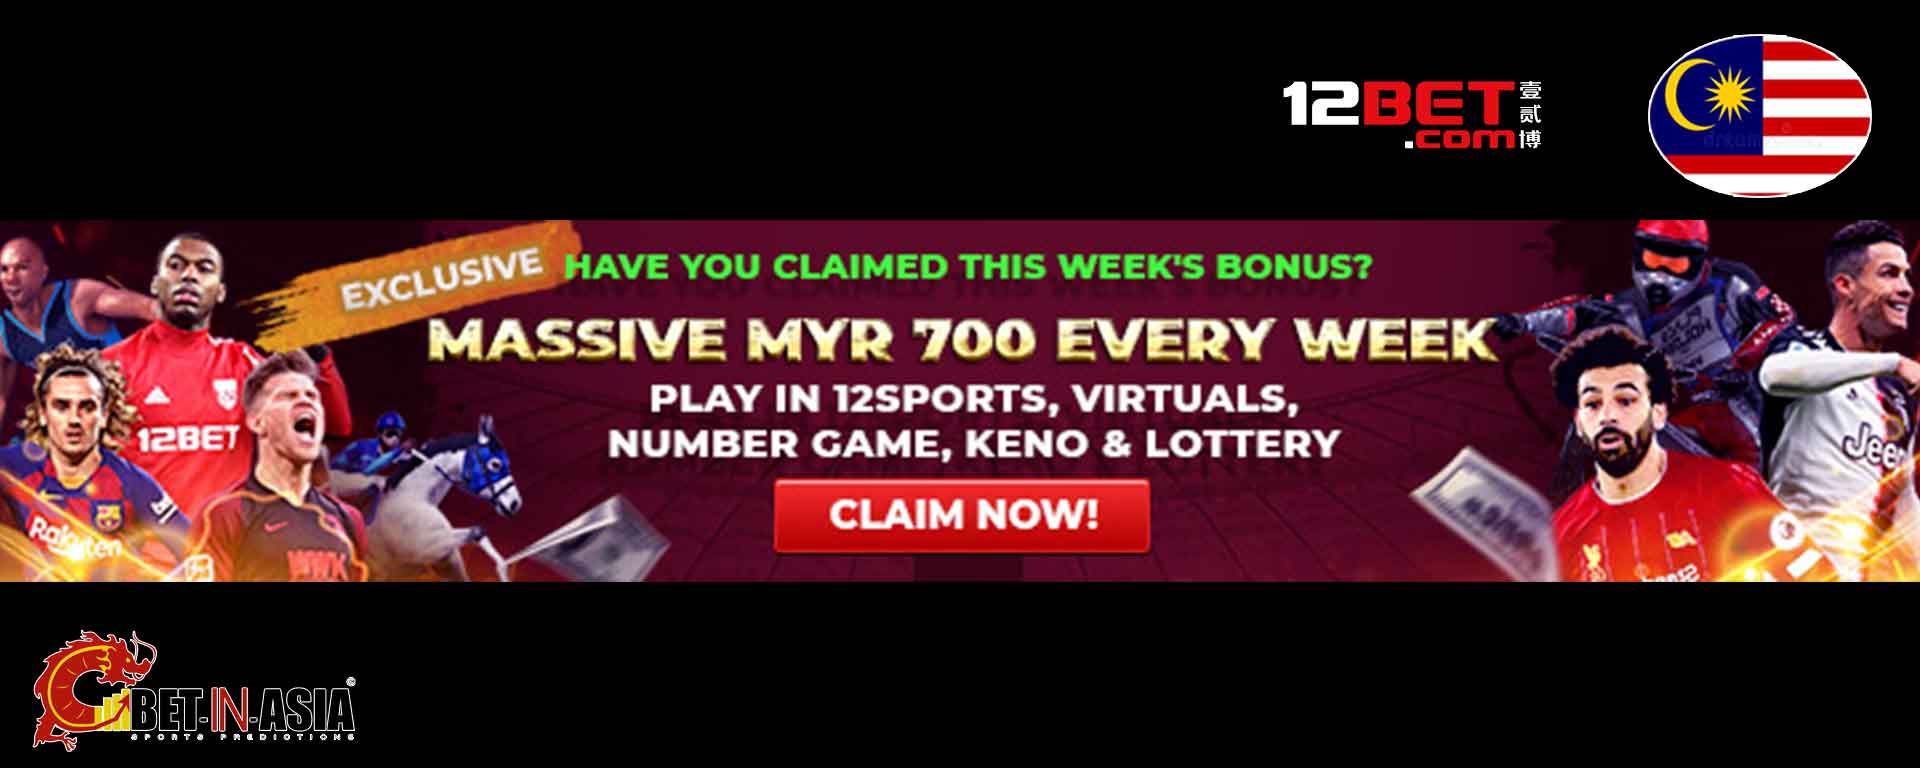 12bet malaysia offering massive bonuses this day